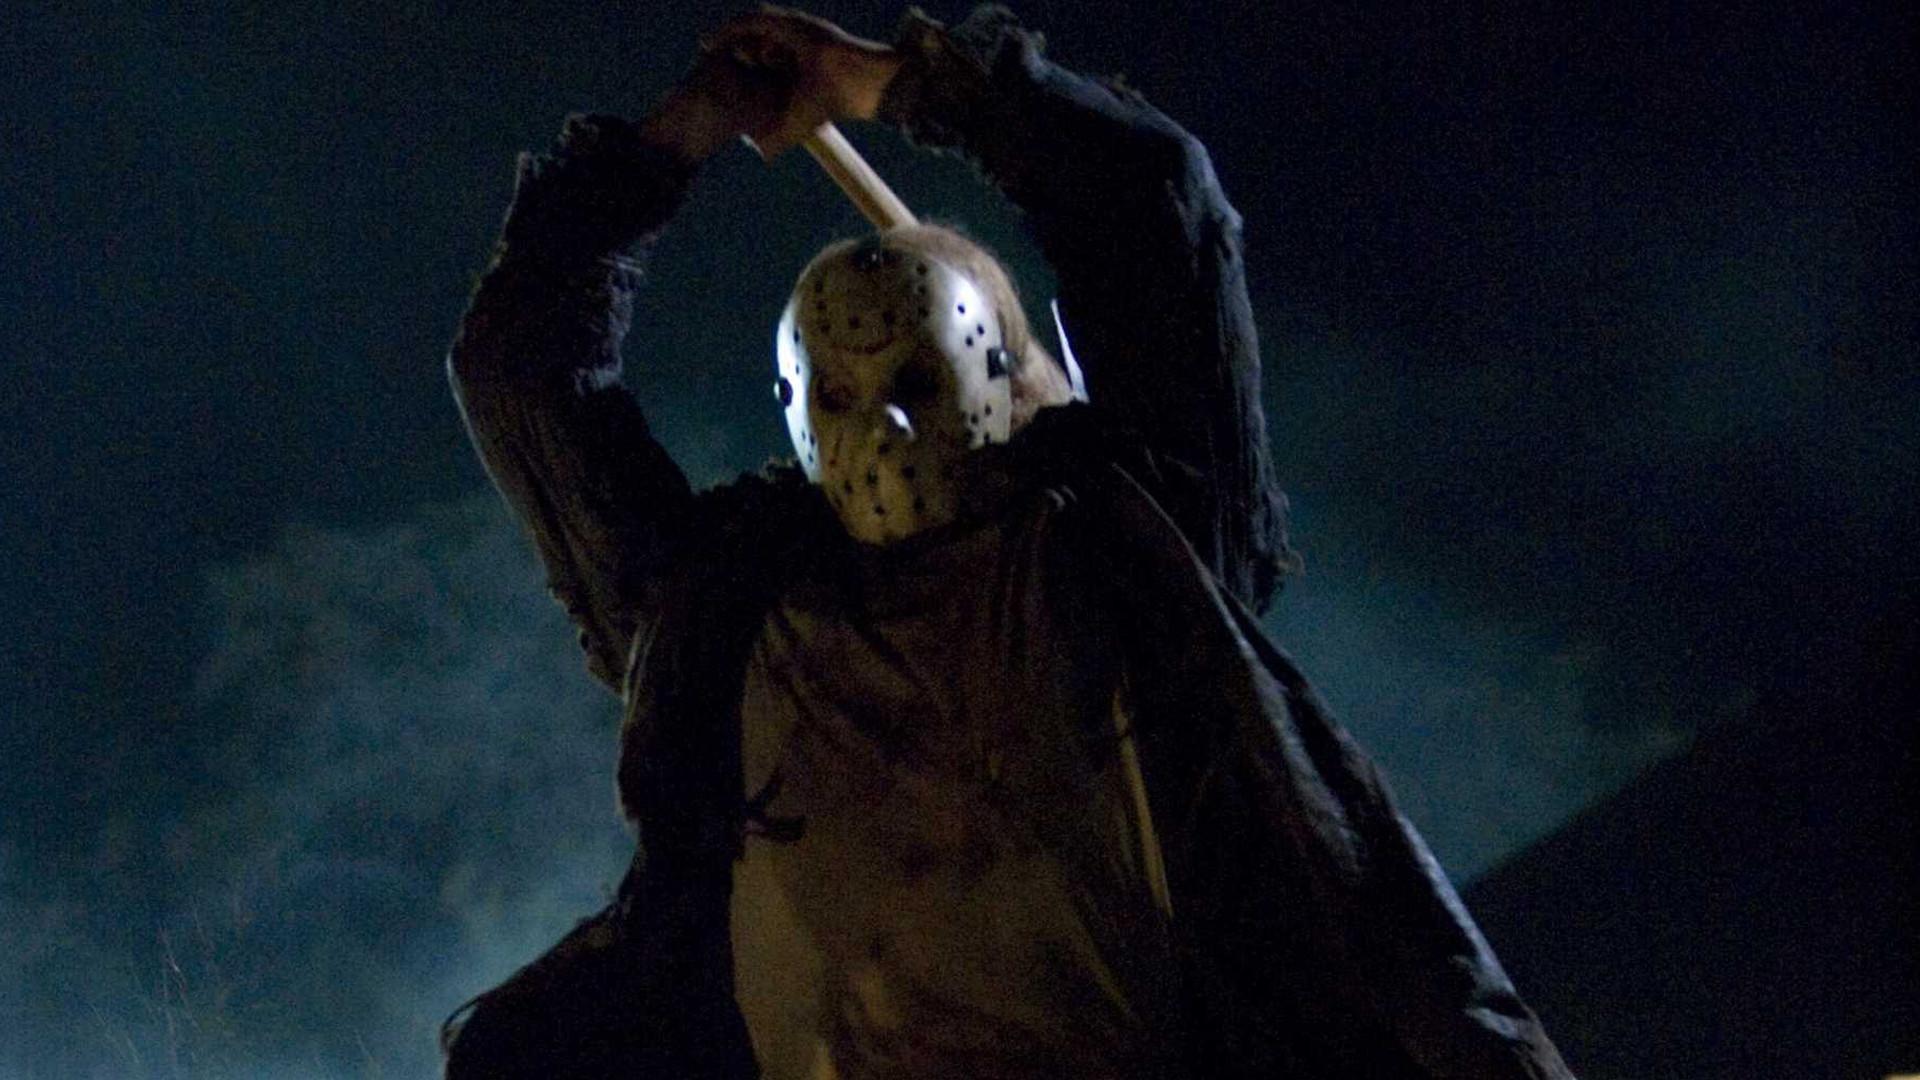 what is the name of the camp terrorized by jason in friday the 13th 1980